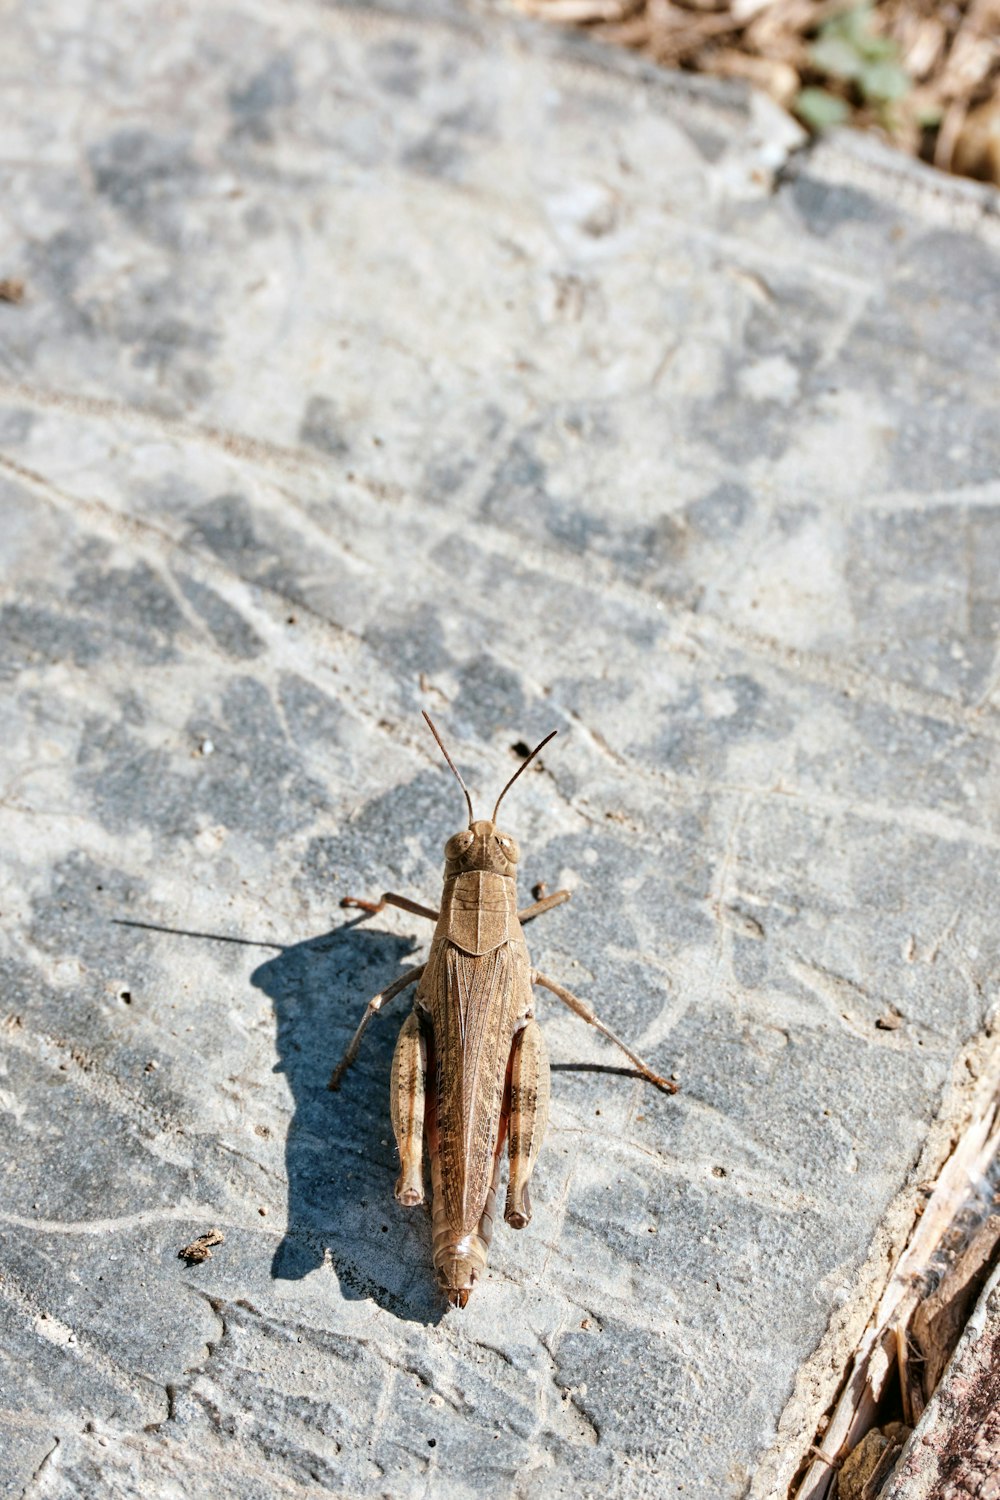 a grasshopper is standing on a stone surface